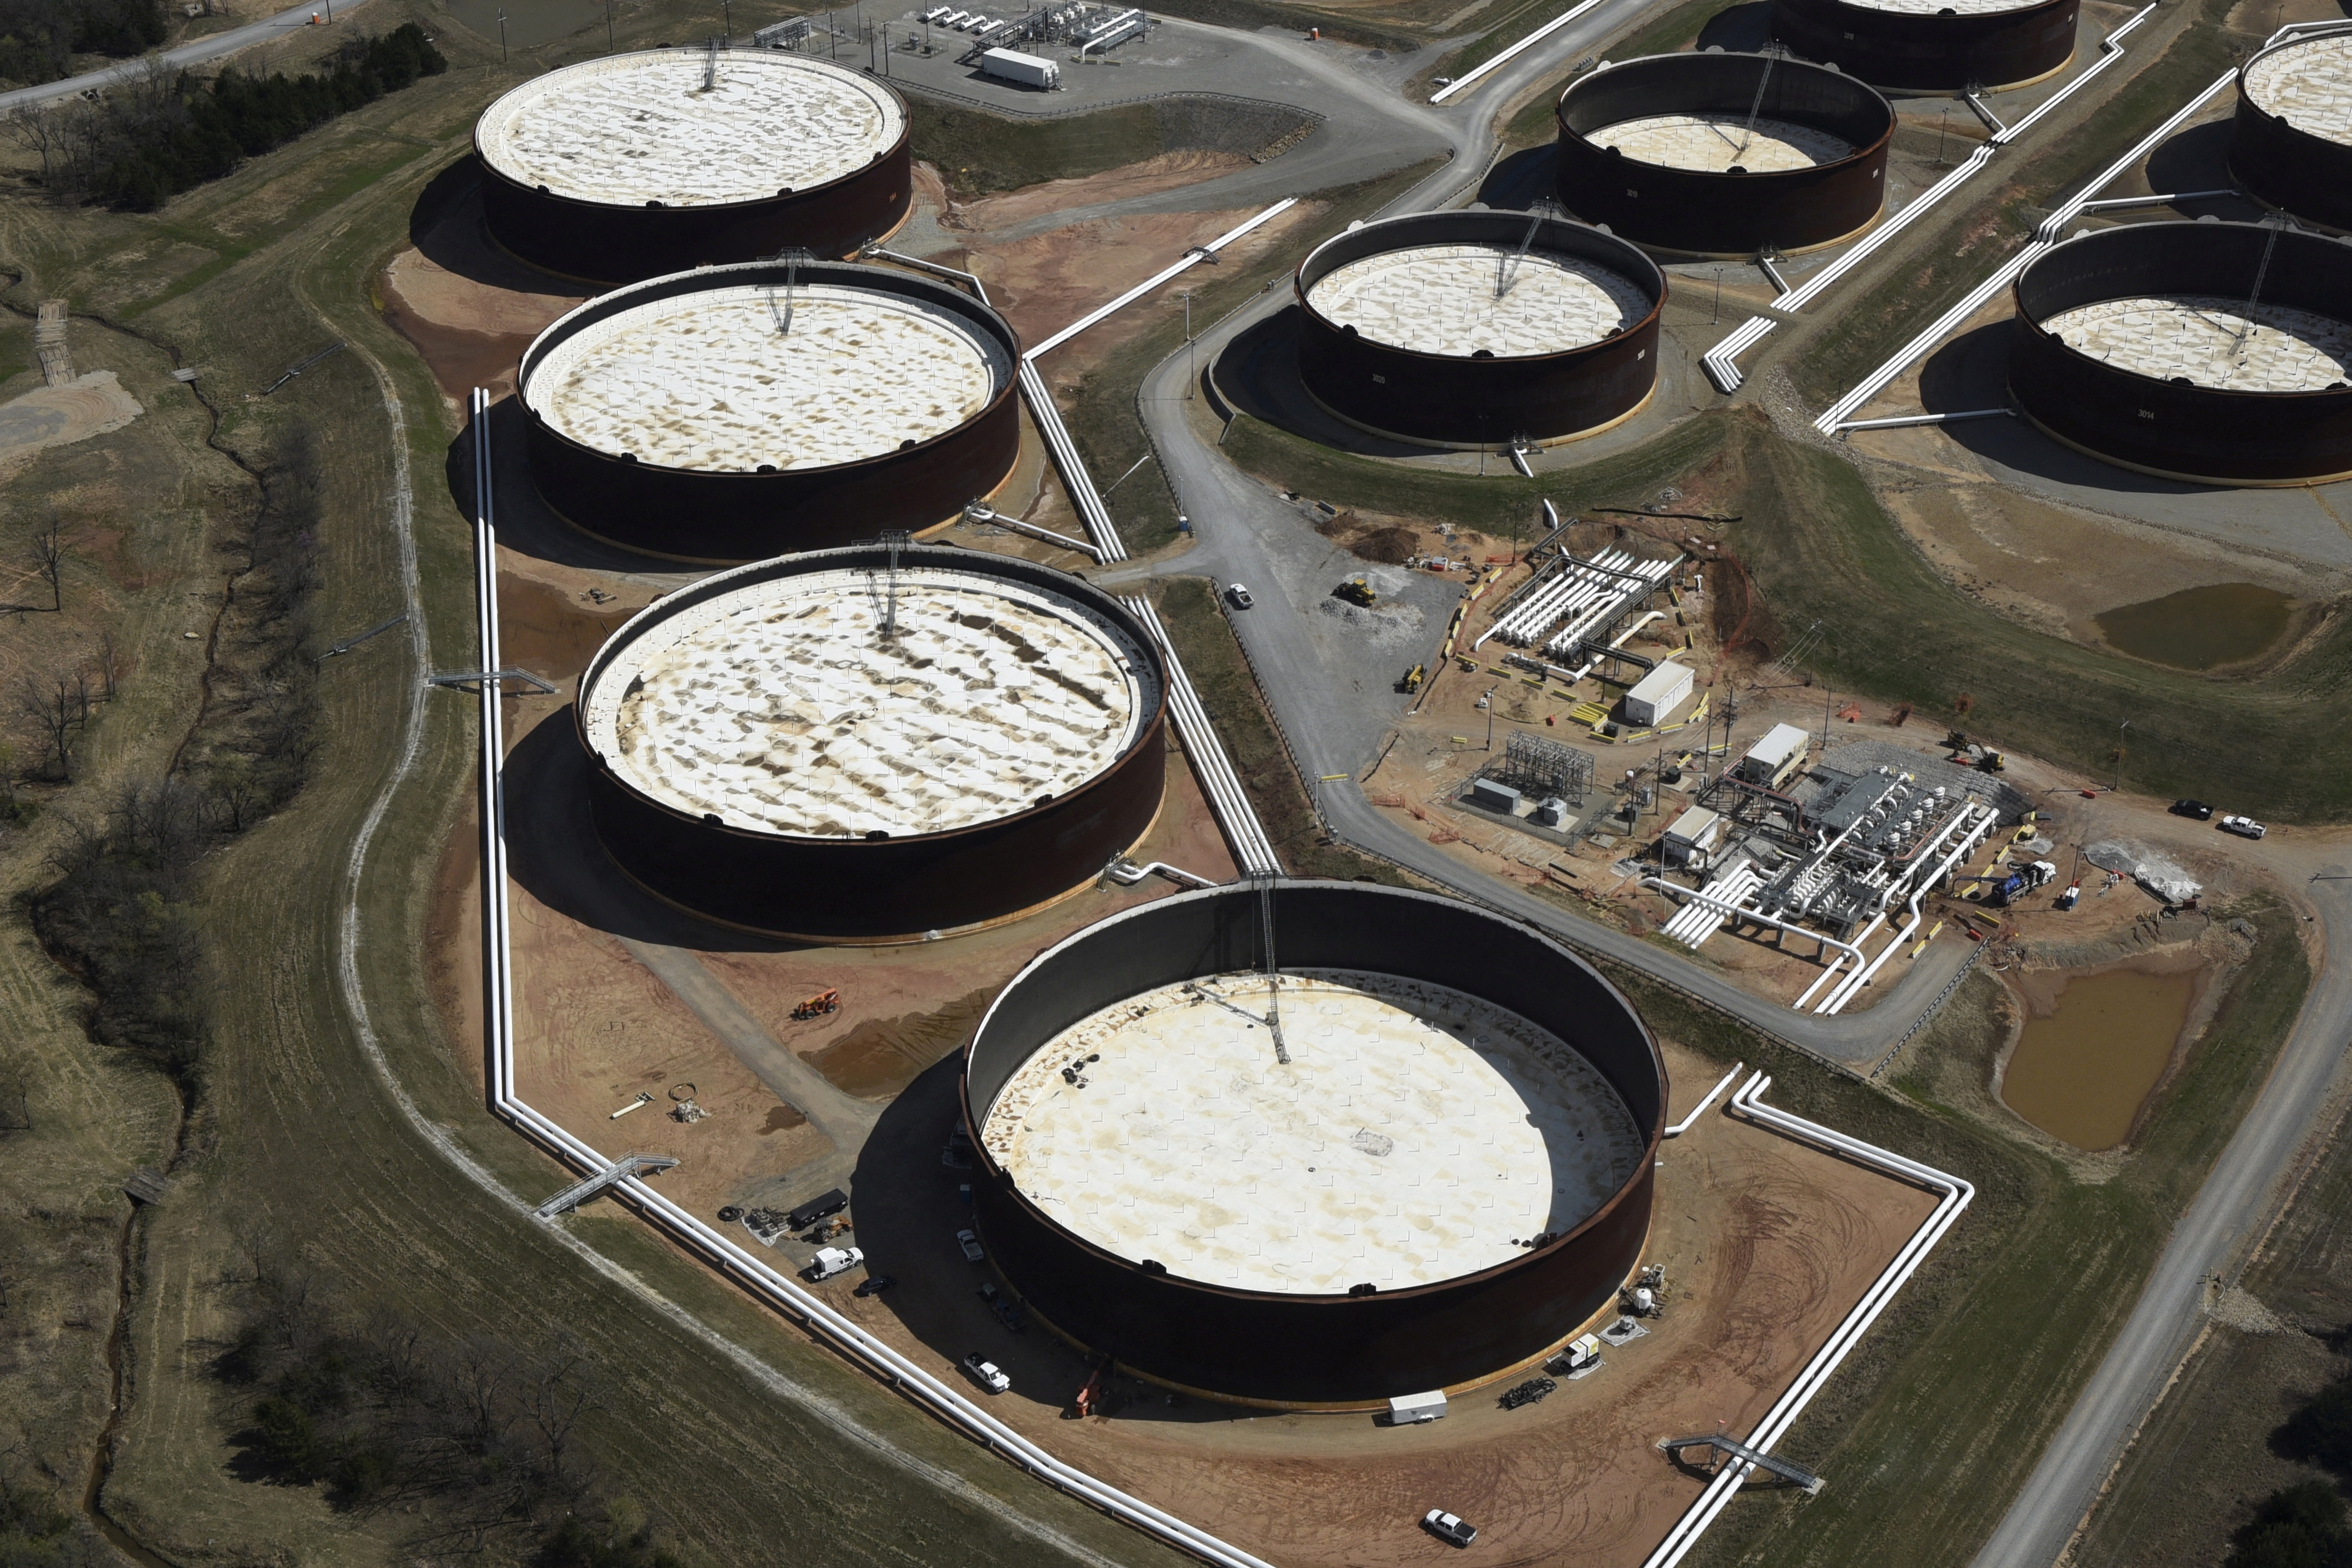 Crude oil storage tanks are seen from above at the Cushing oil hub, appearing to run out of space to contain a historic supply glut that has hammered prices, in Cushing, Oklahoma, March 24, 2016. Picture taken March 24, 2016. REUTERS/Nick Oxford